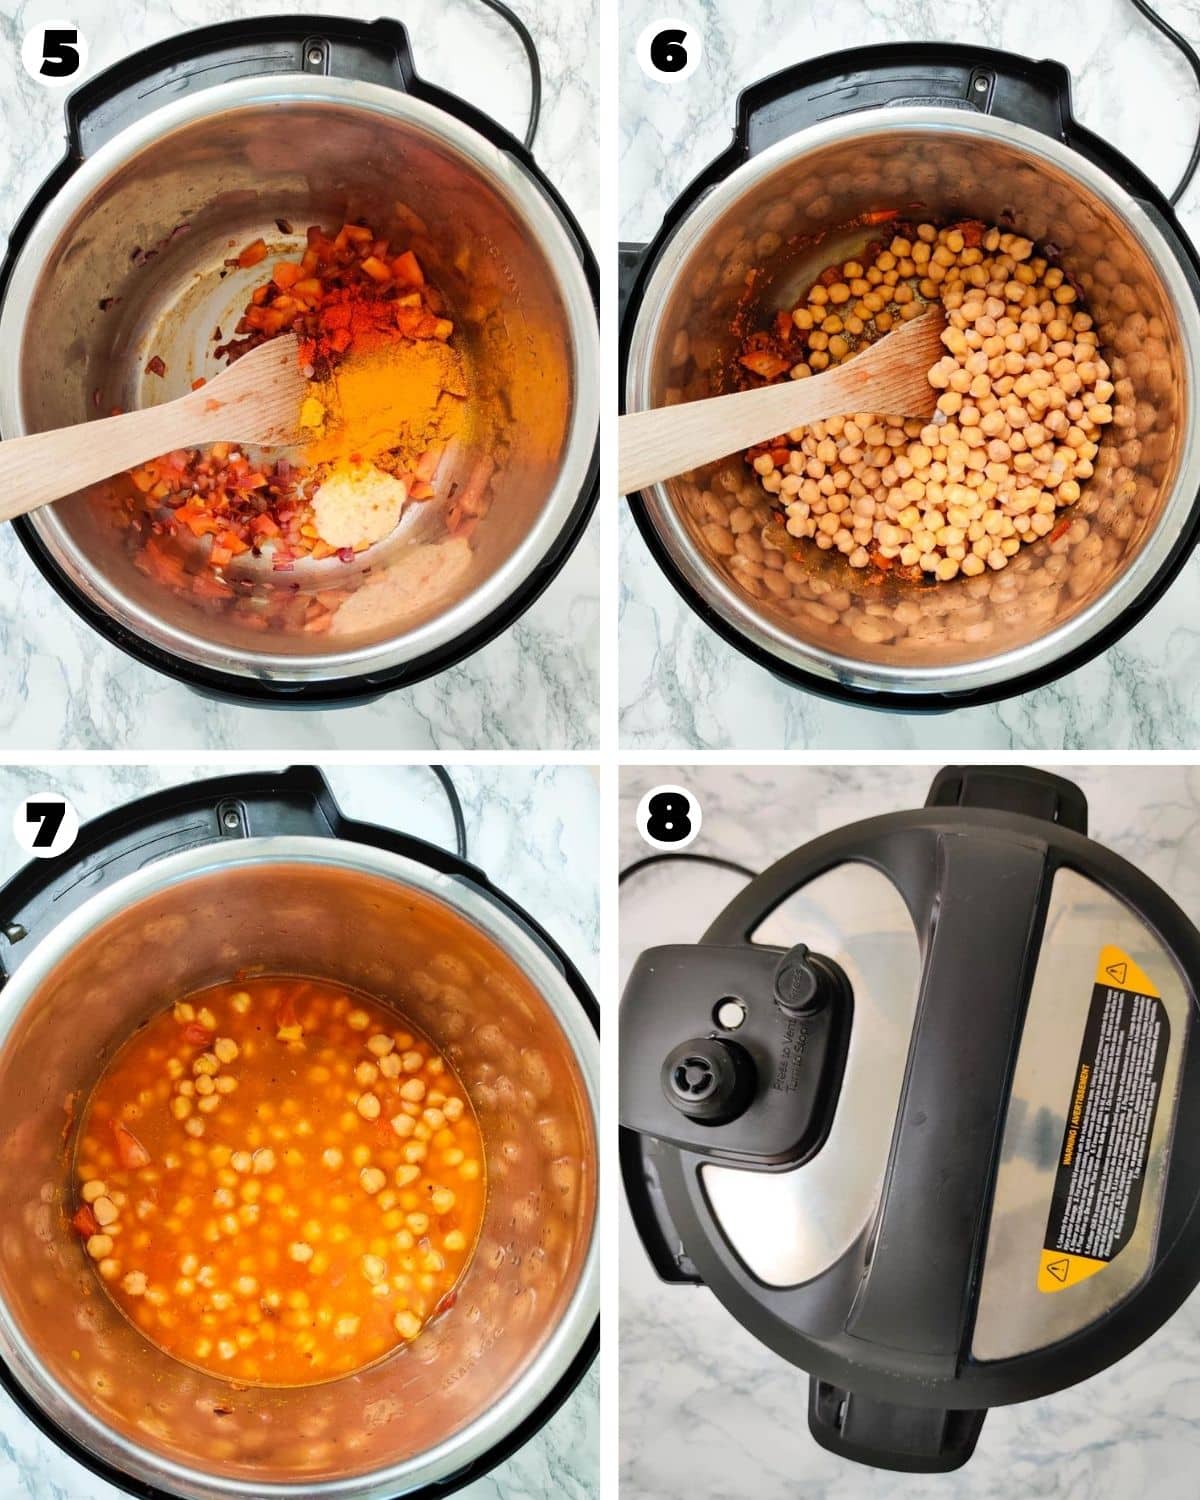 Add spices, ginger garlic past, chickpeas and water to pressure cook in the Instant Pot